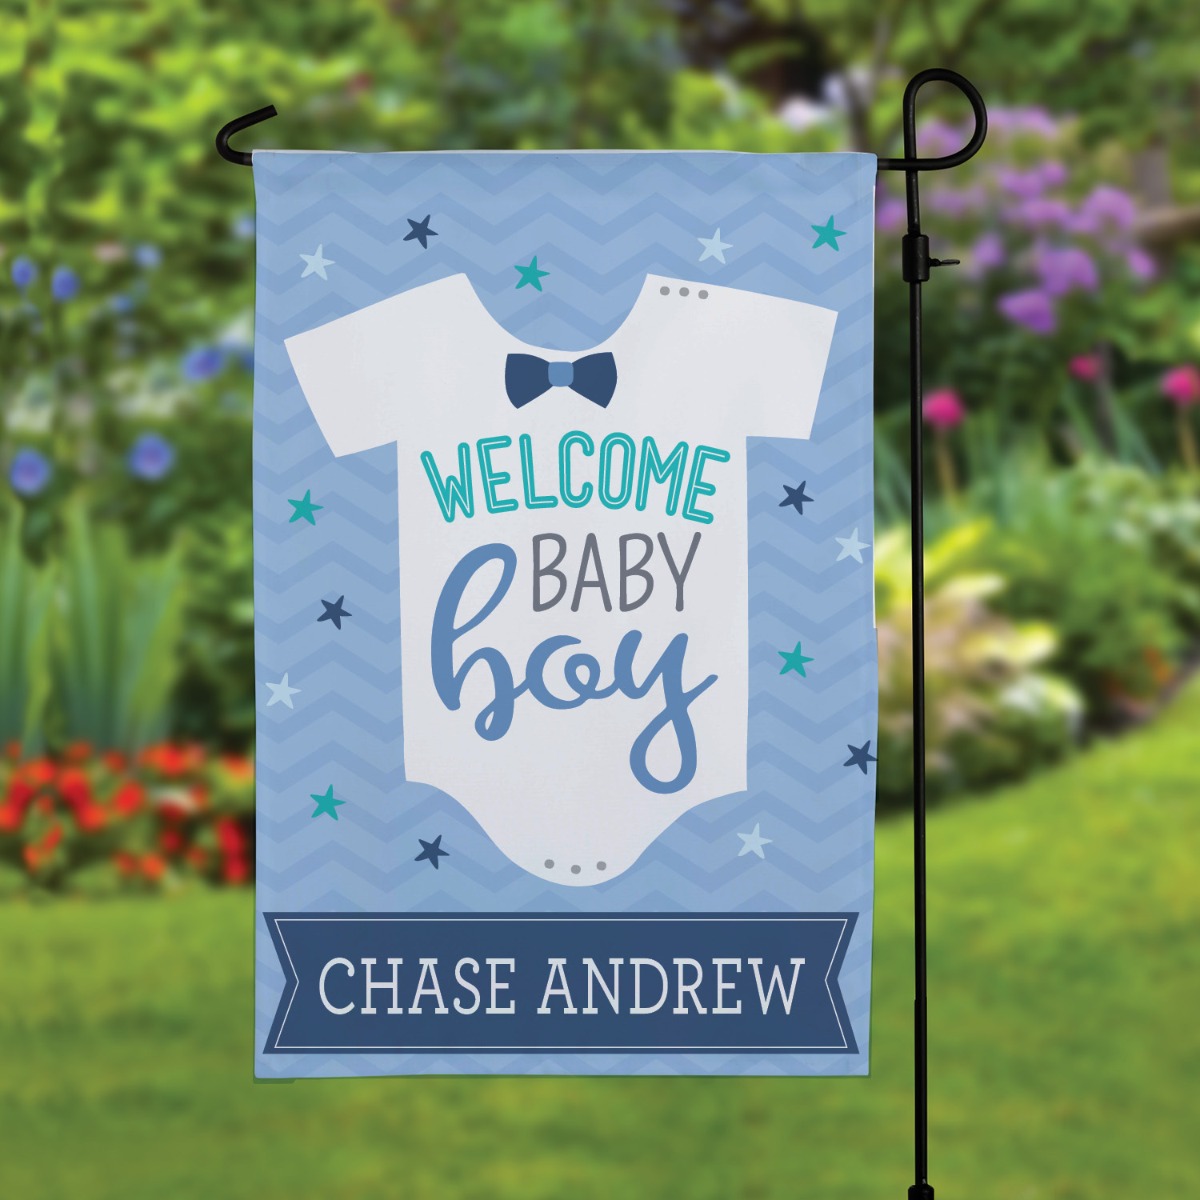 Welcome Baby Boy Personalized White Garden Flag